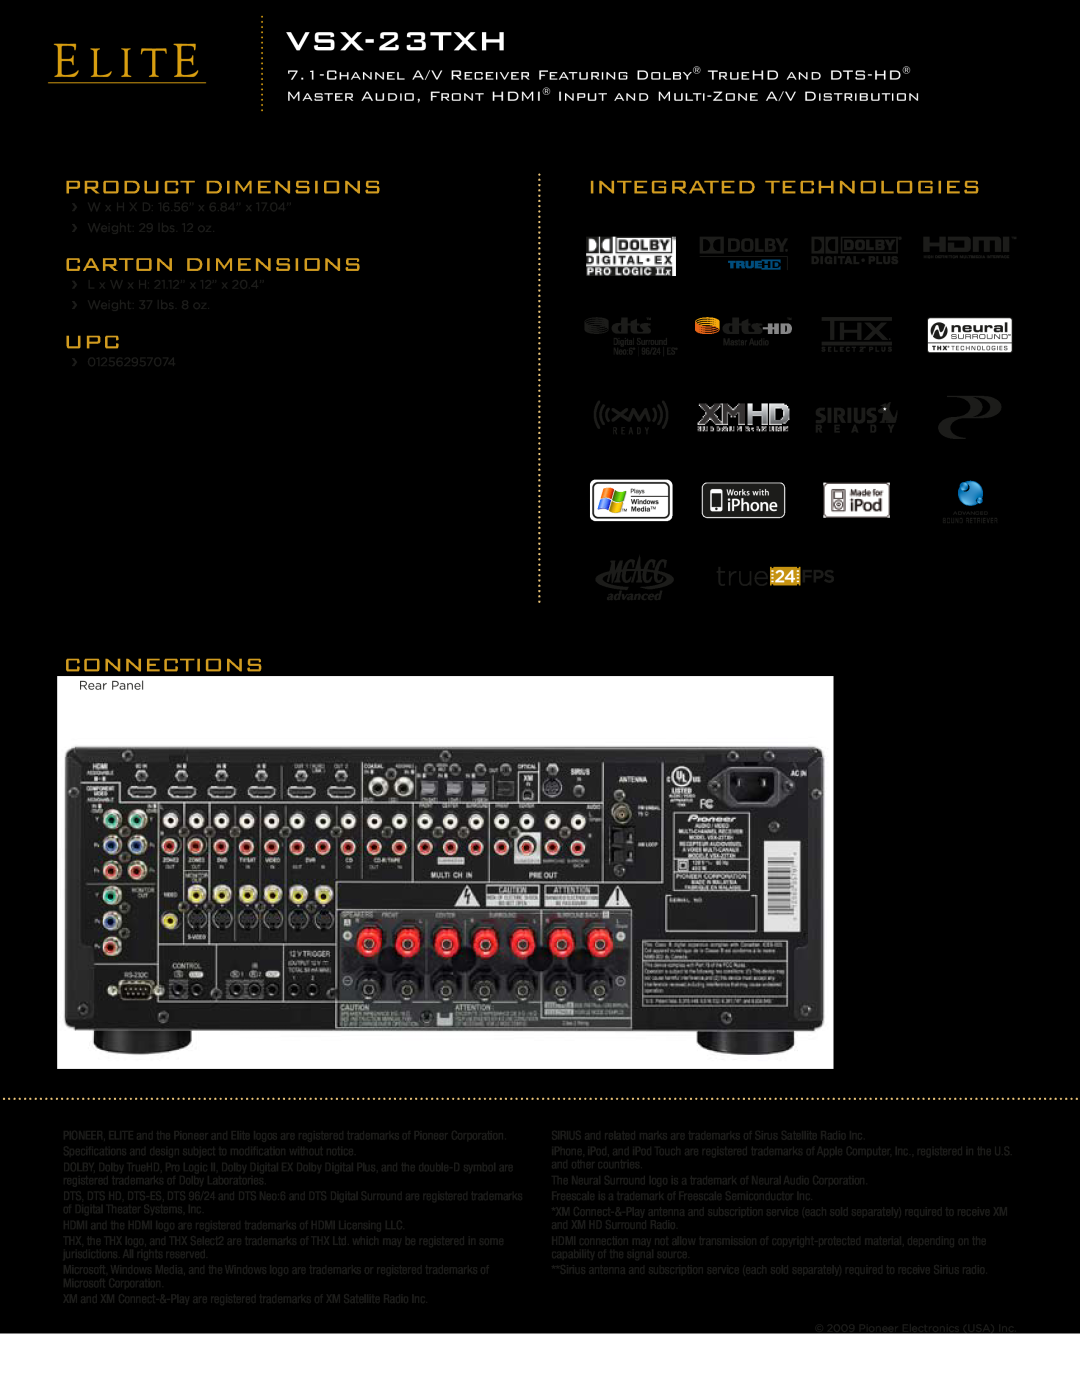 Pioneer VSX-23TXH manual Integrated Technologies, Product Dimensions, Carton Dimensions, Connections 